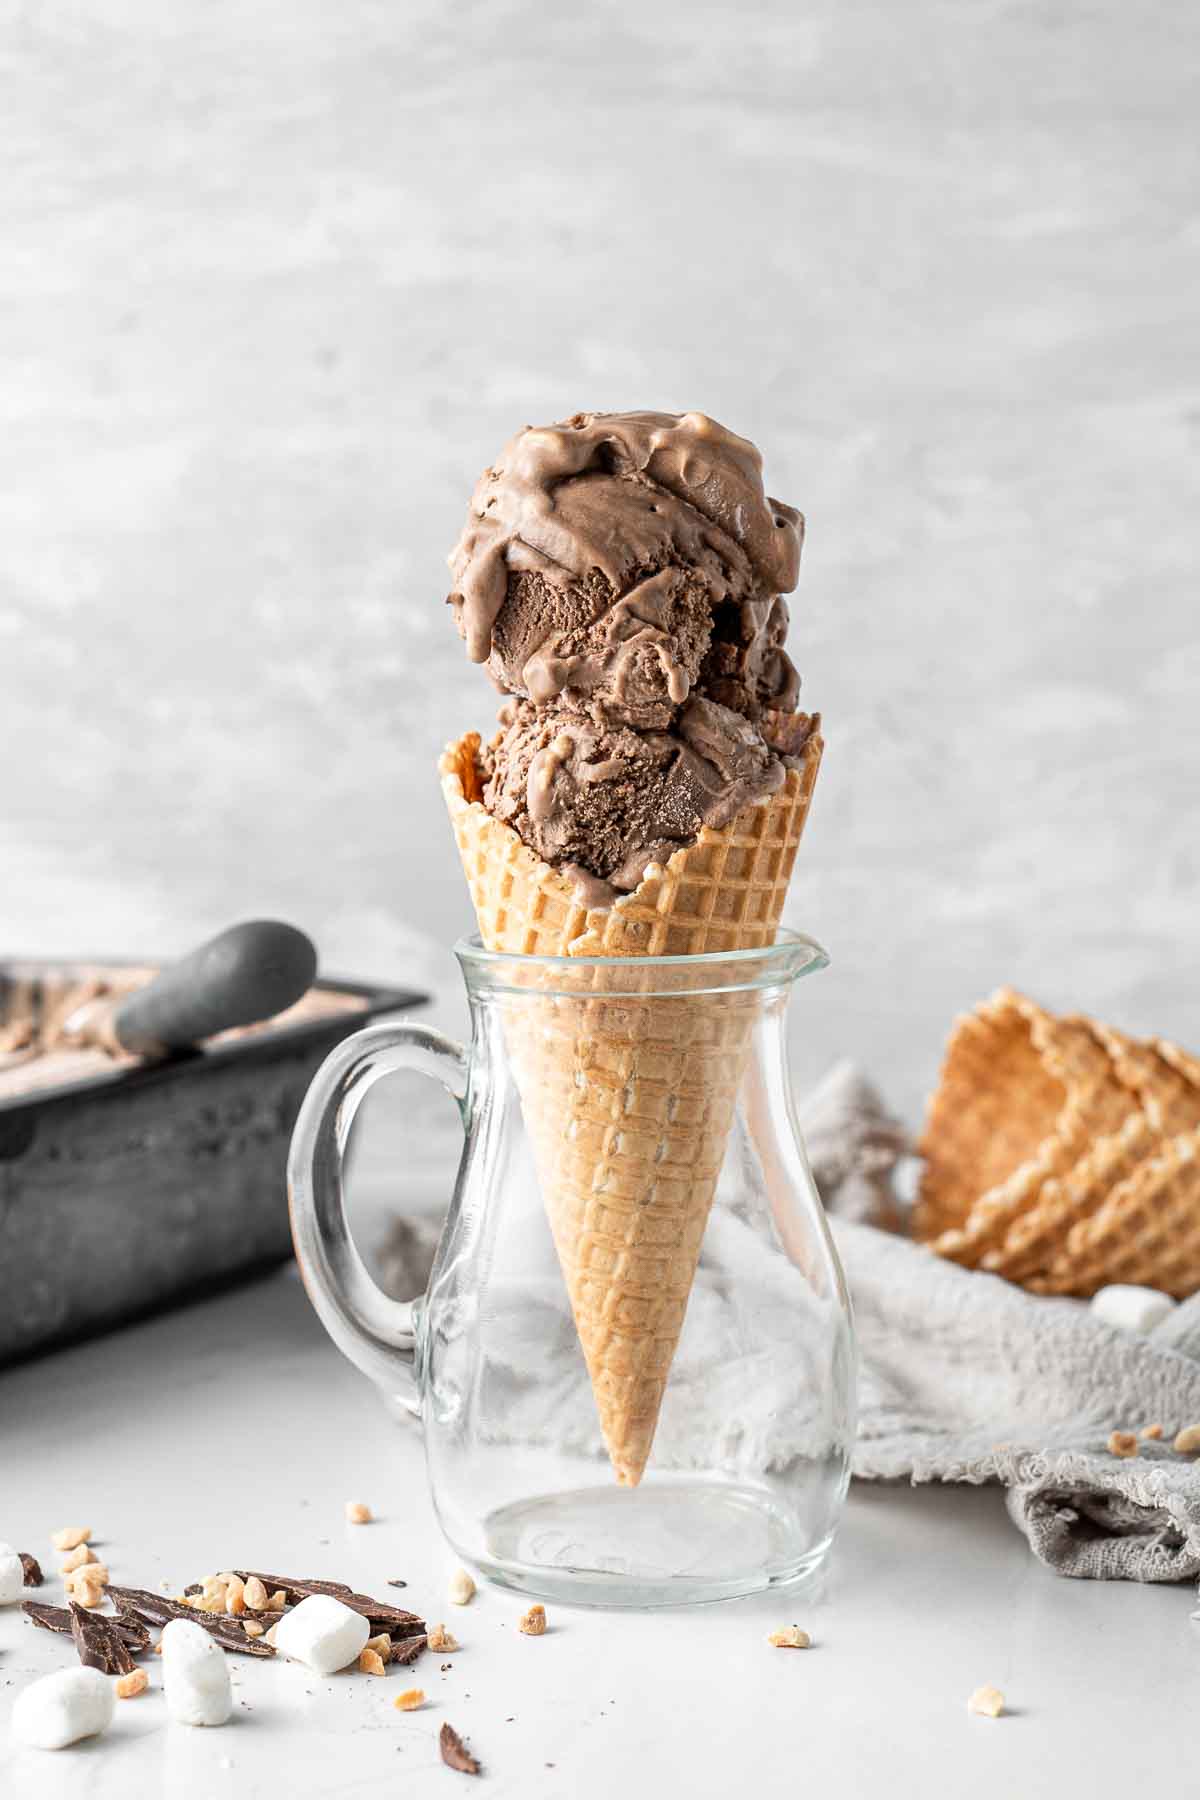 Dairy free chocolate ice cream in a waffle cone standing upright in a glass jug.